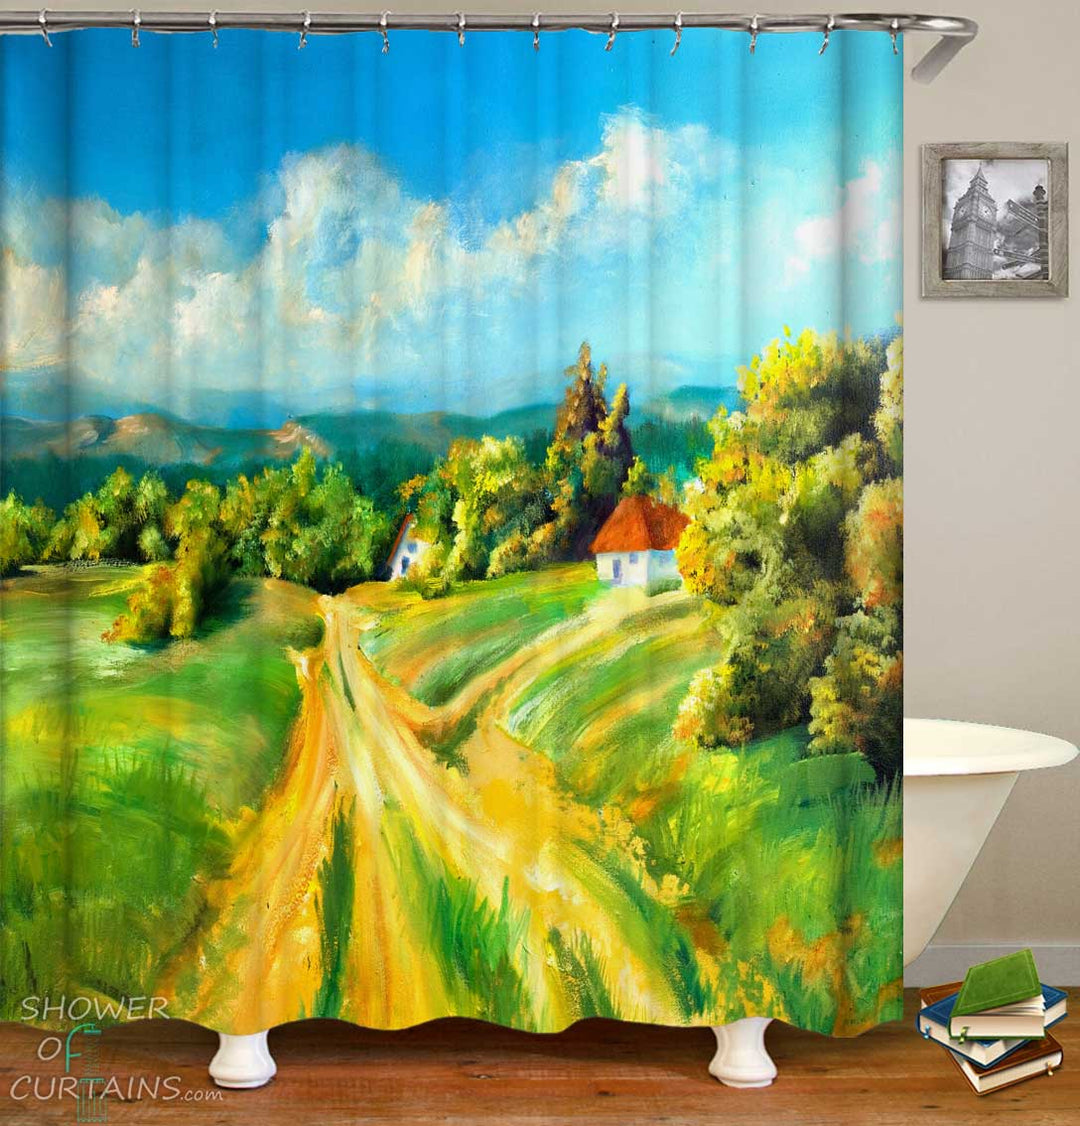 Shower Curtains with Rustic Art Painting